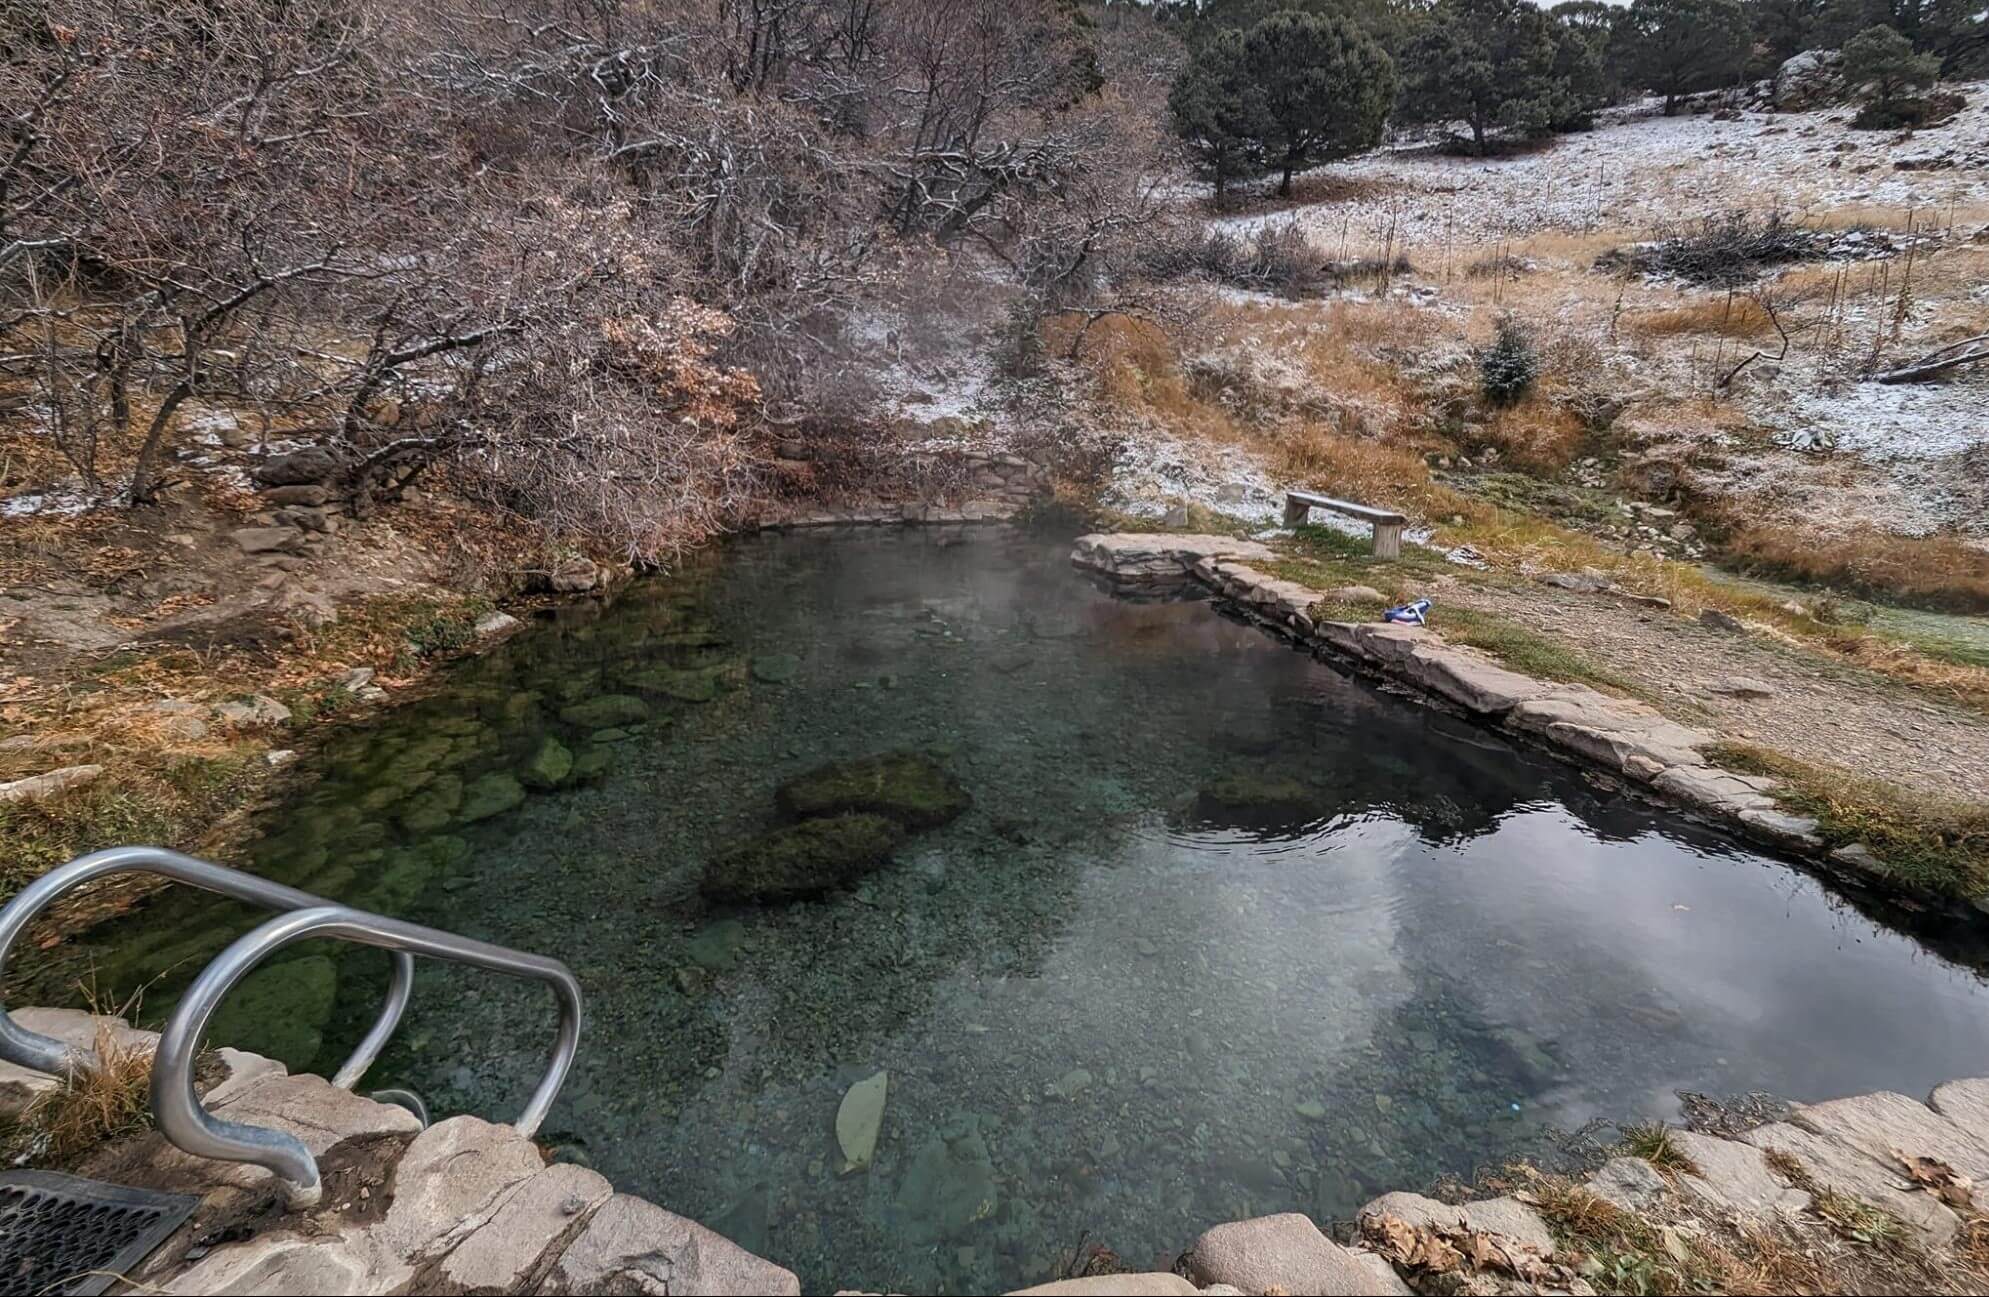 beverly fedder recommends Valley View Hot Springs Photos